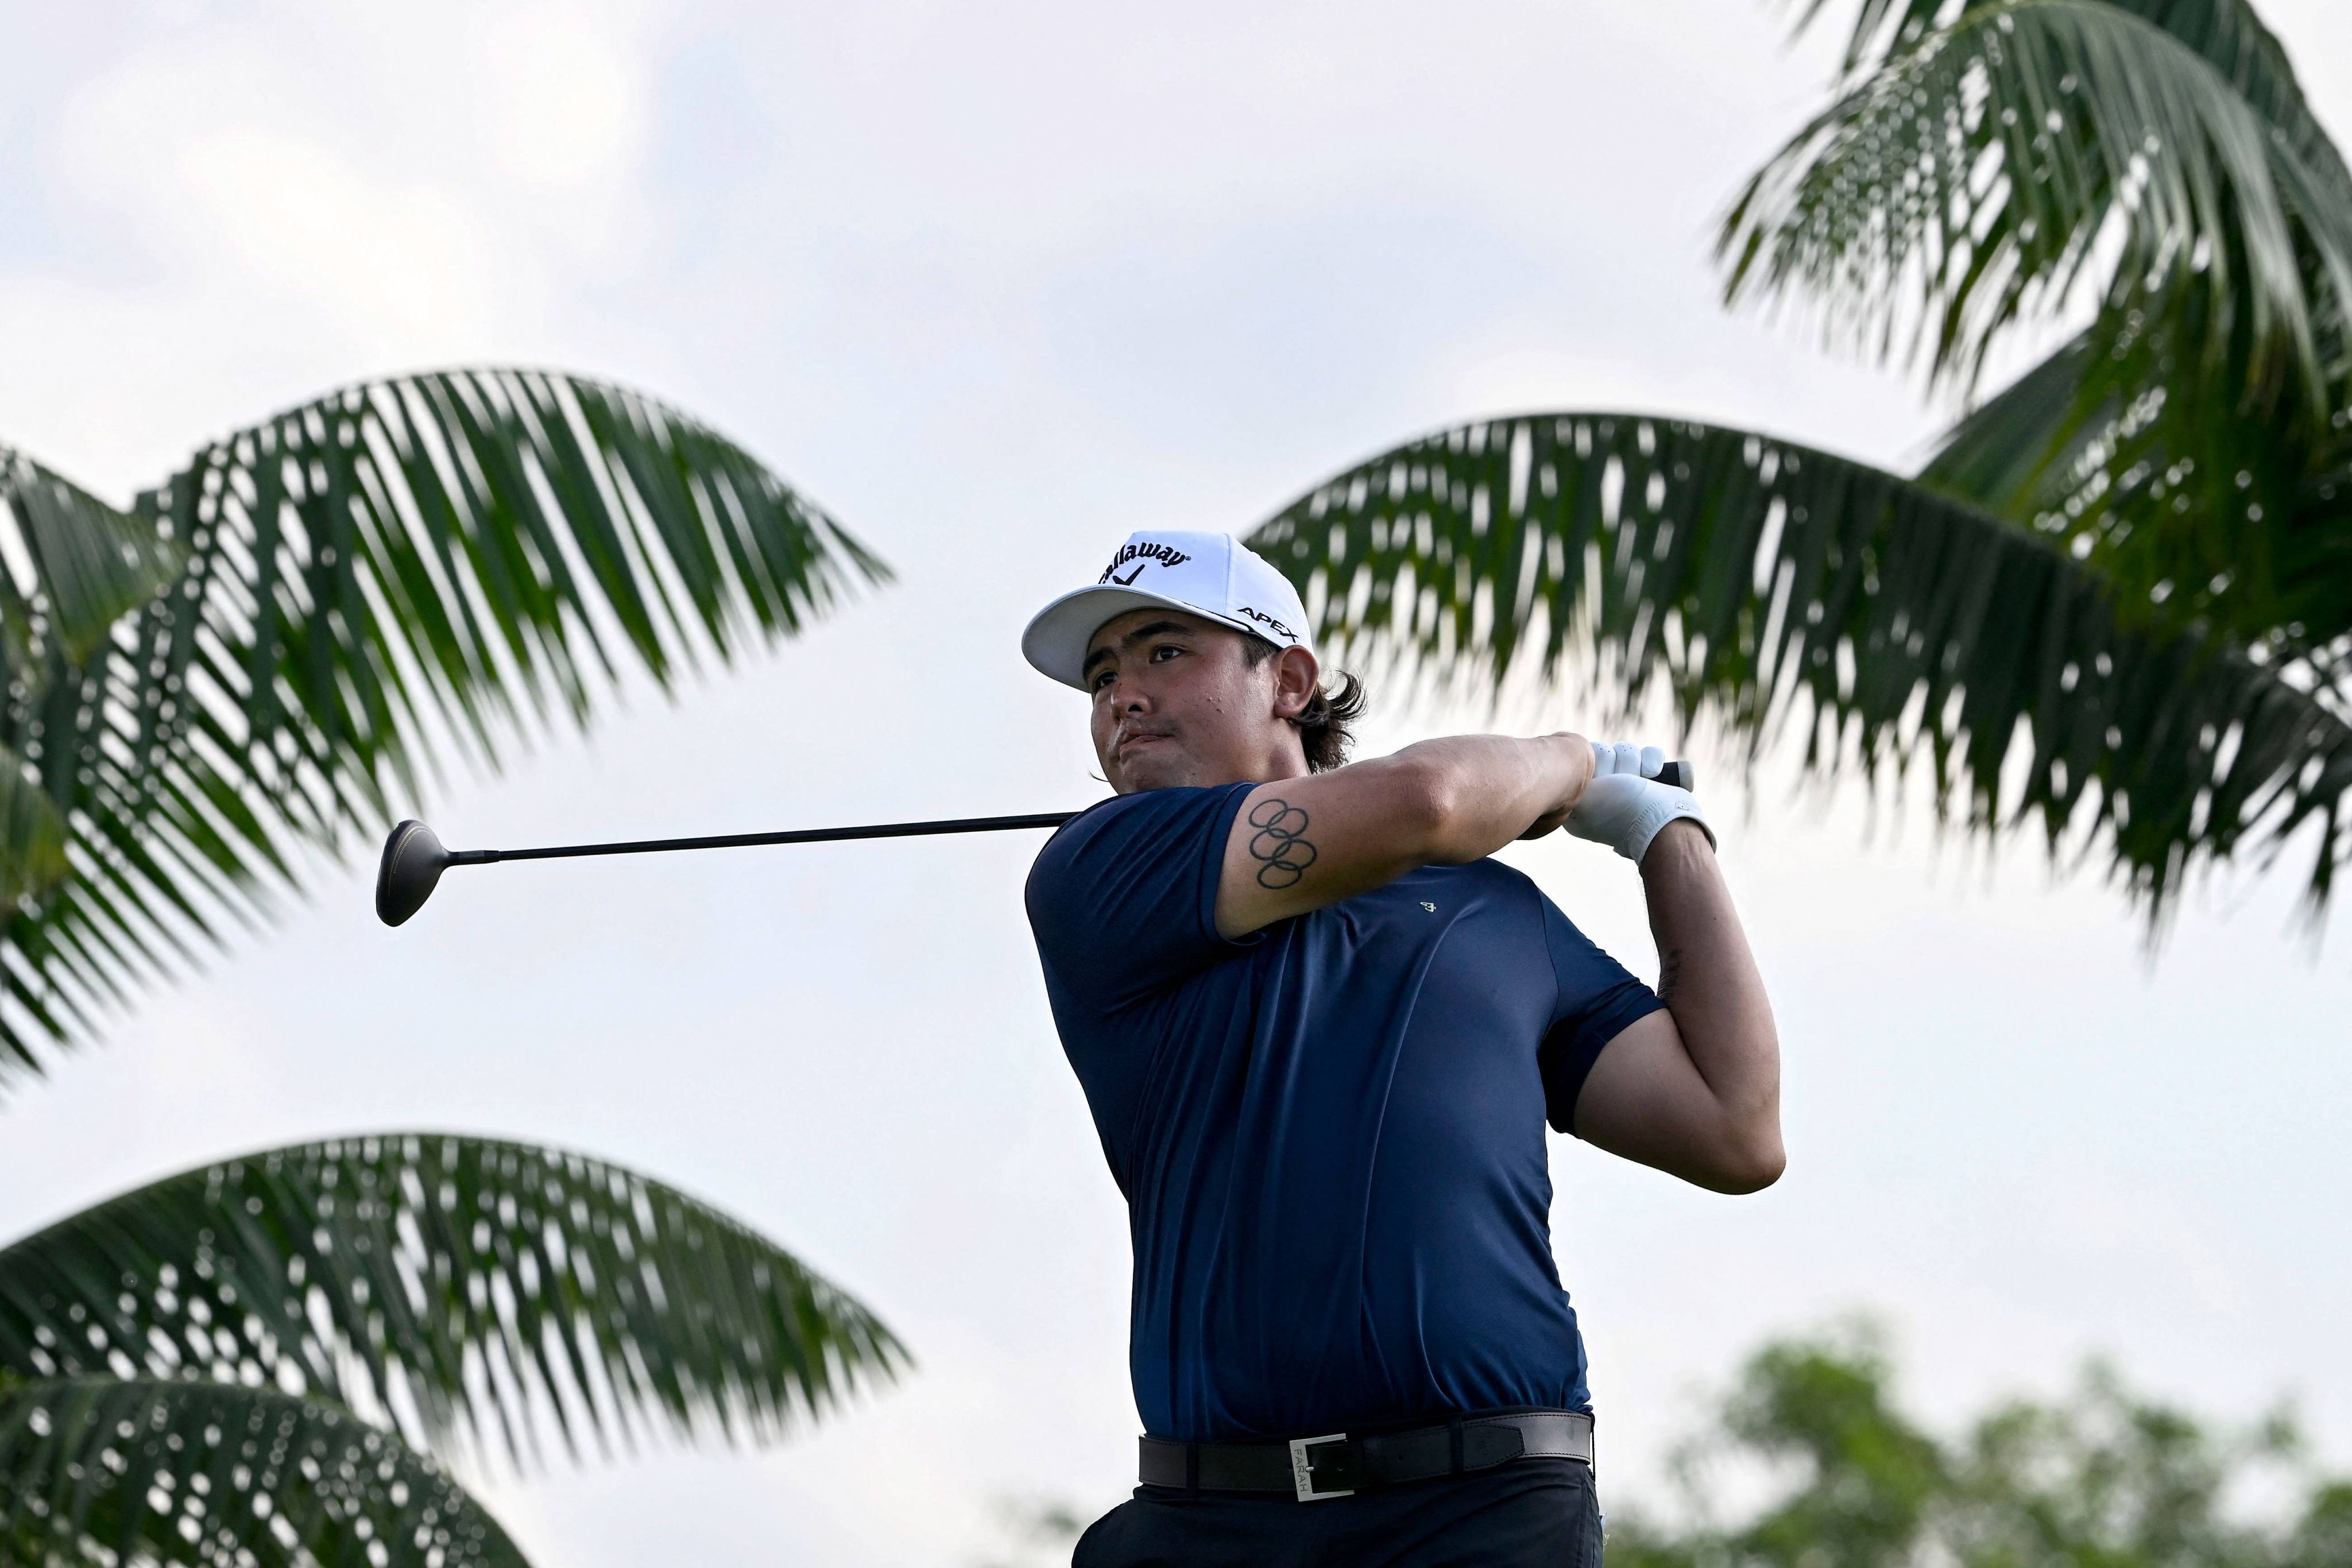 Gavin Green plays a shot during the second round of the International Series Singapore golf tournament. Photo: Asian Tour